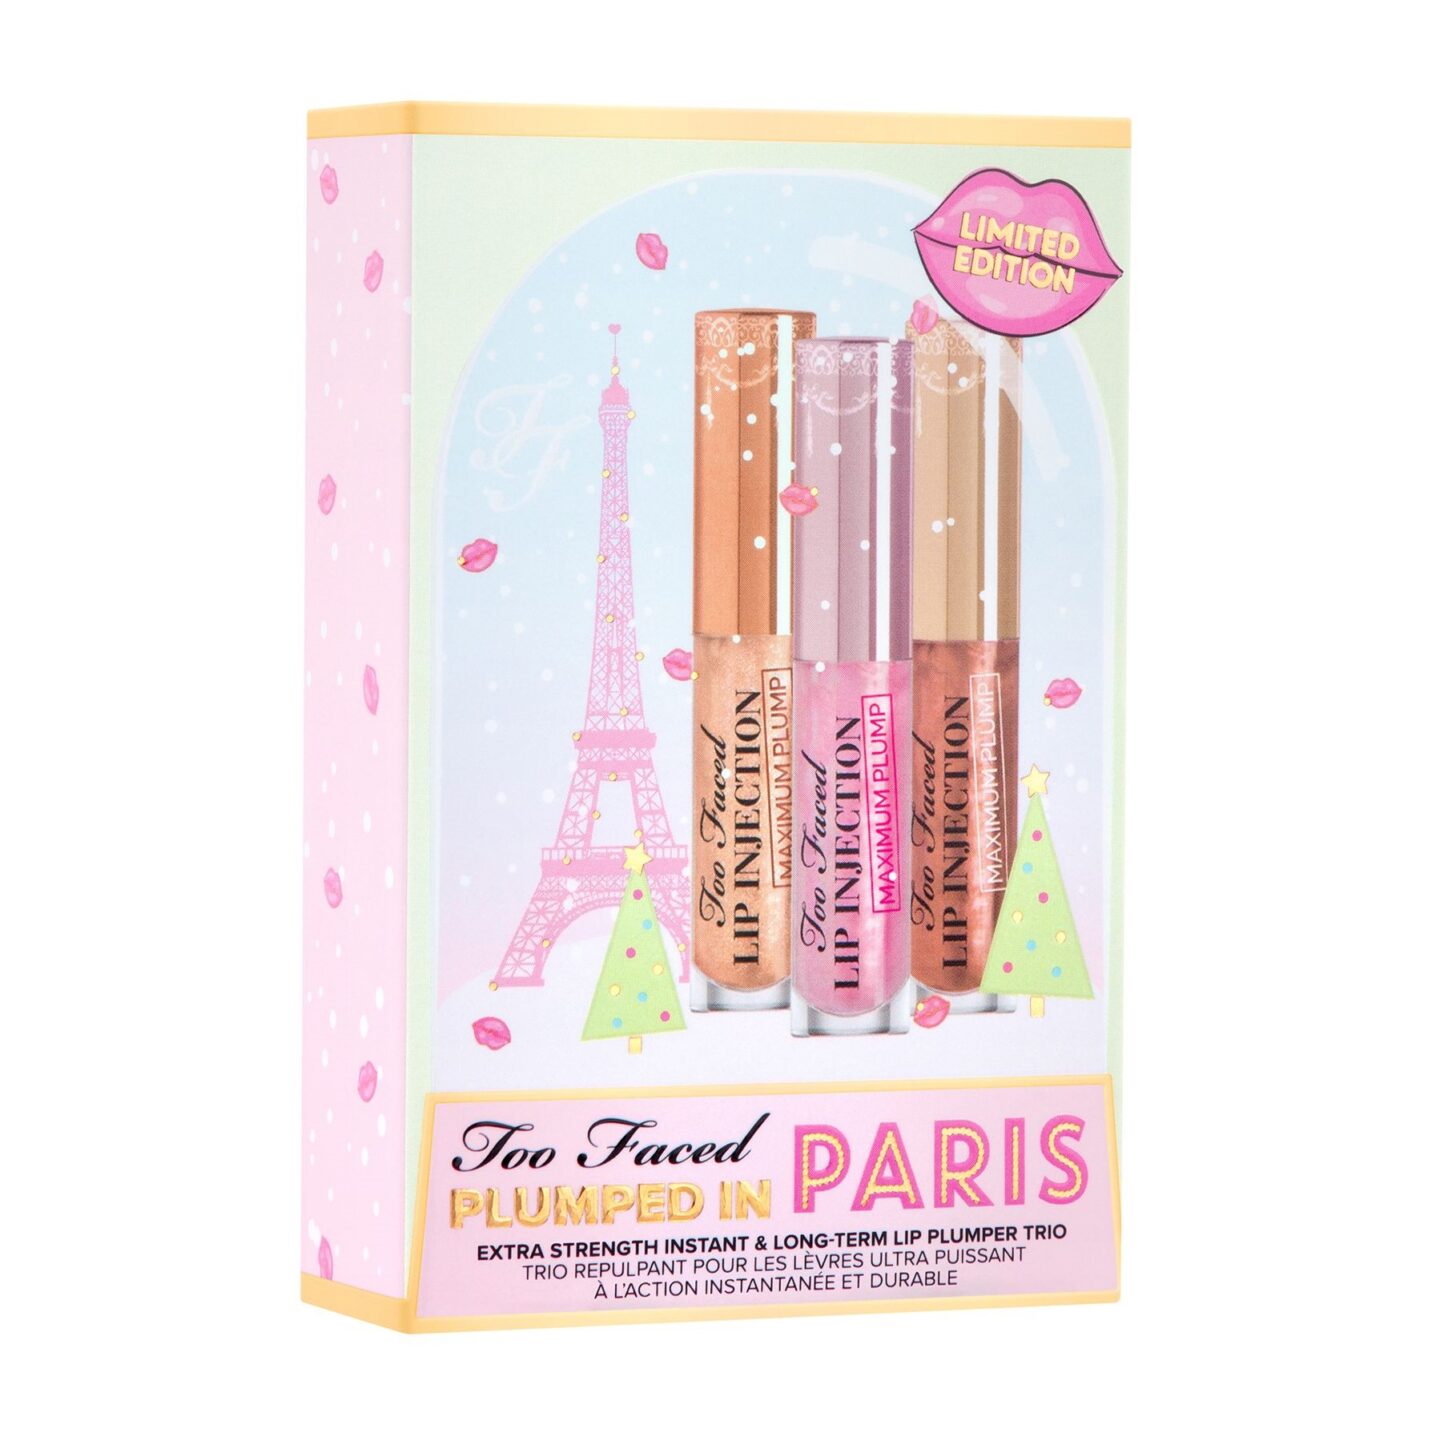 Too Faced Plumped in Paris Lip Injection Lip Plumper Set